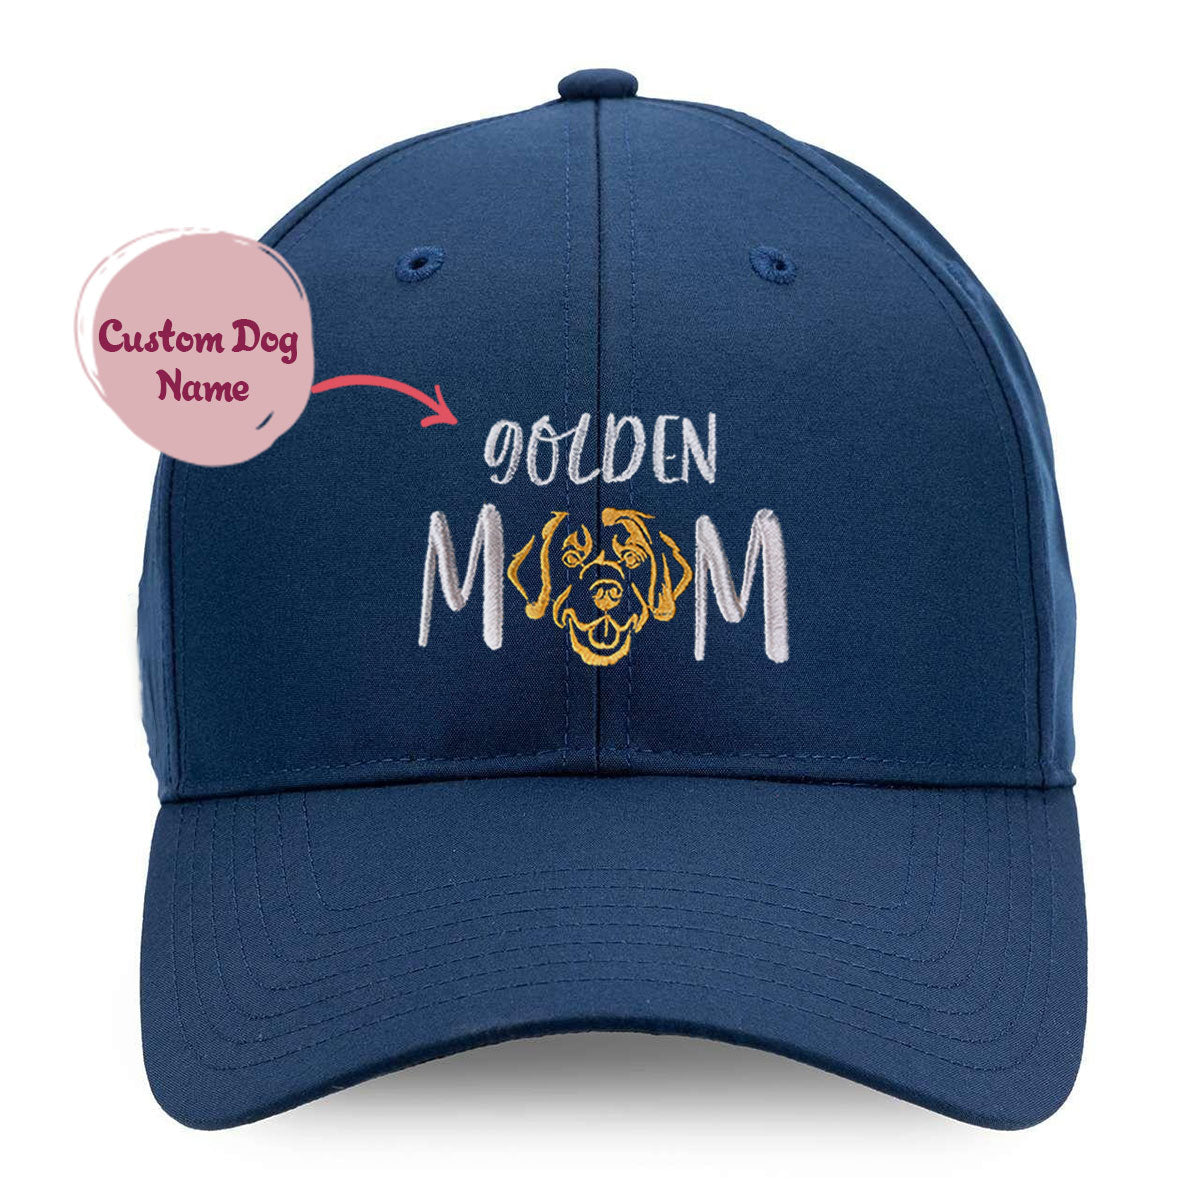 Custom Golden Retriever Dog Mom Embroidered Hat, Personalized Hat with Dog Name, Gifts for Golden Retriever Lovers